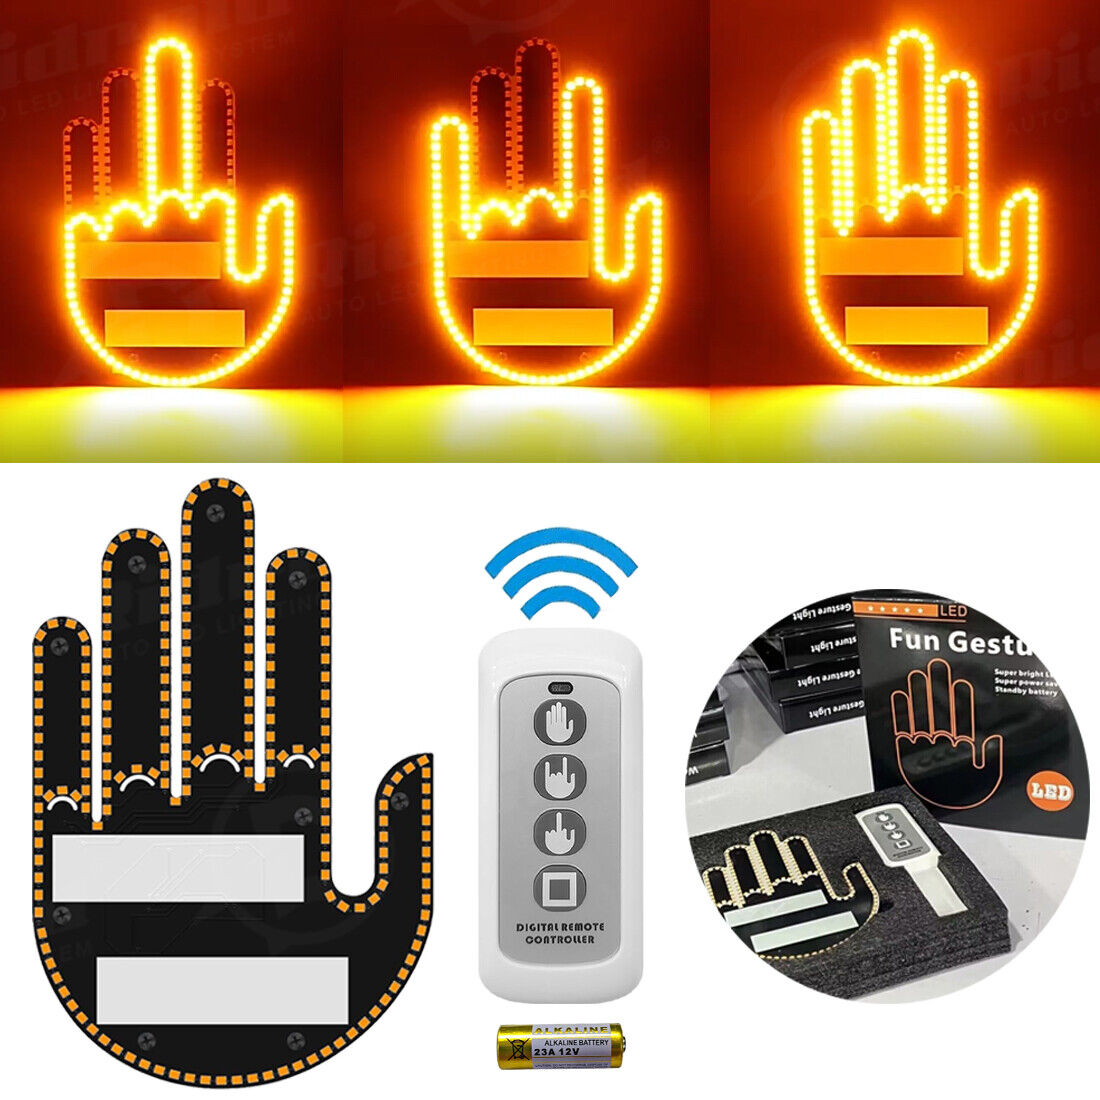 Finger Gesture Light with Remote LED Car Back Window Sign Hand Light Xmas Gift